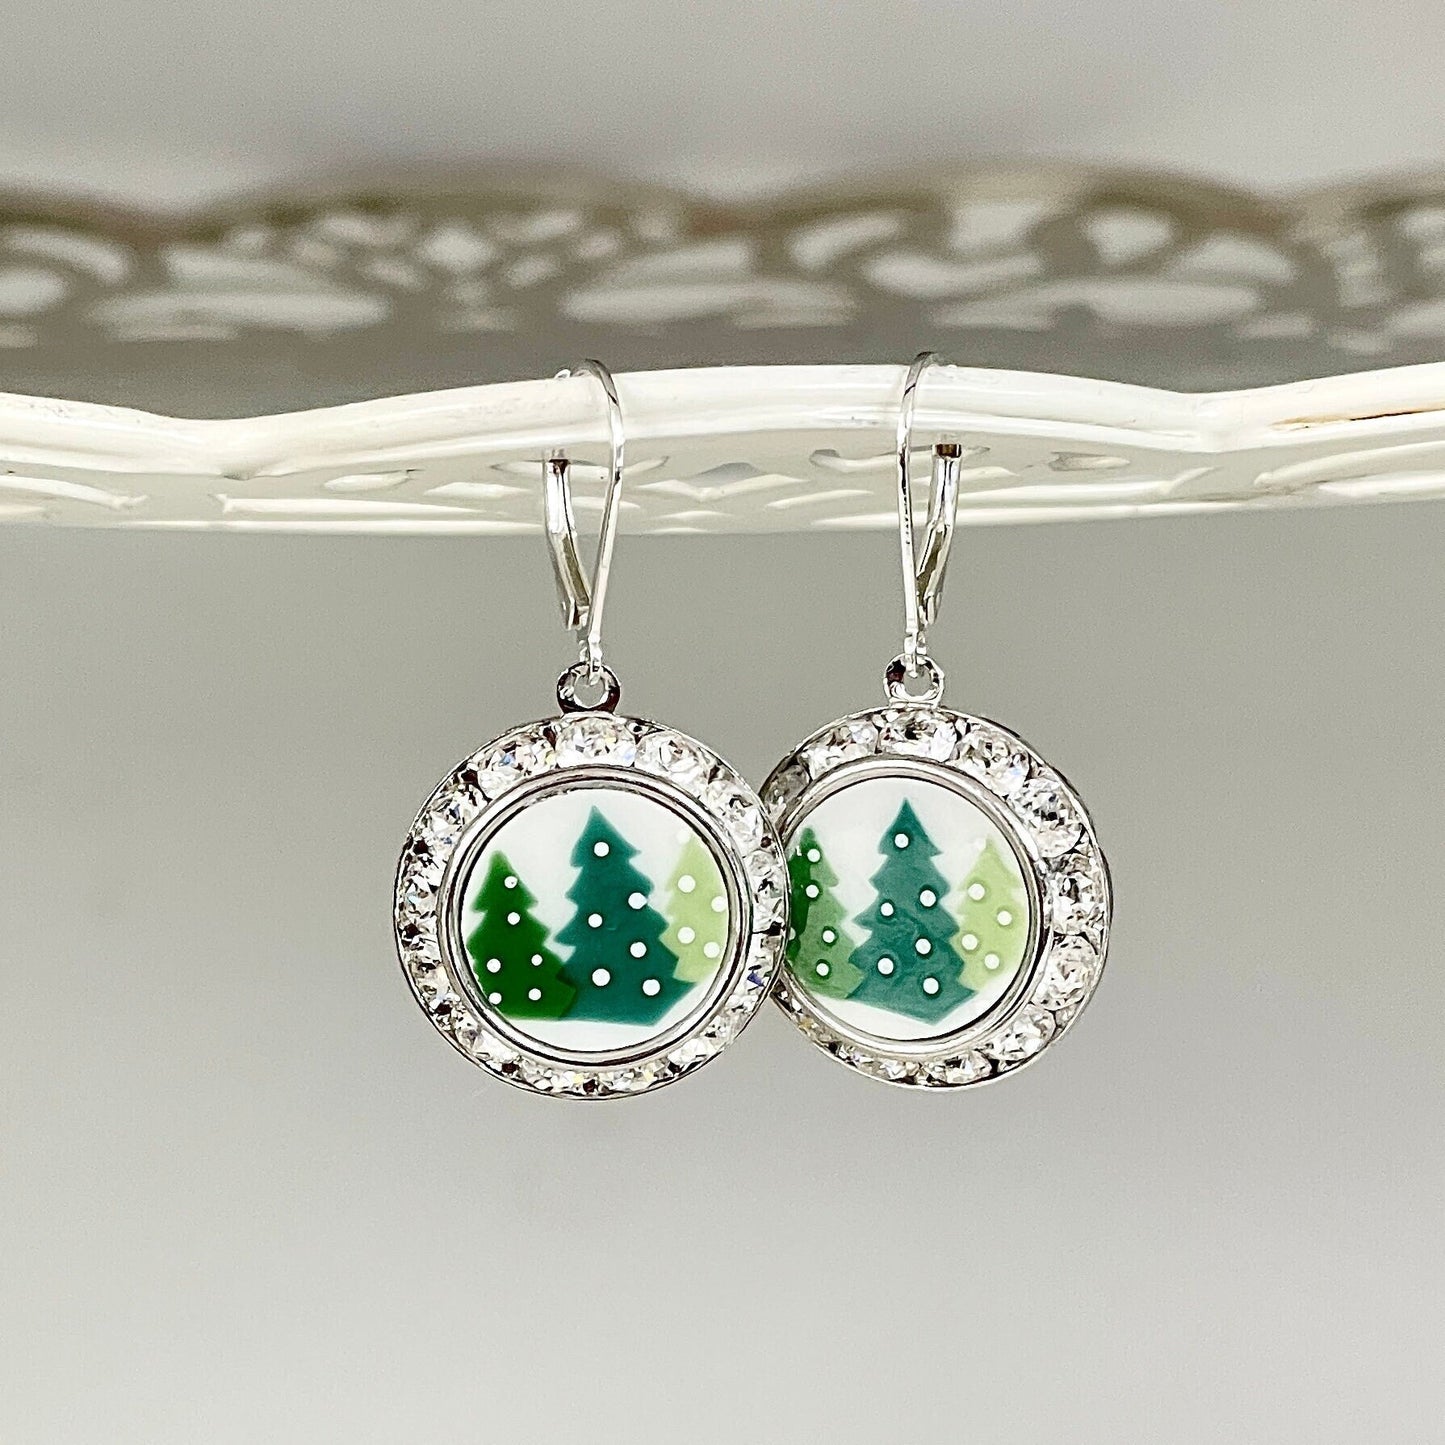 Christmas Tree Crystal Earrings, Vintage Porcelain, Broken China Jewelry Holiday Bling, Christmas Gifts for Women, Stocking Stuffer